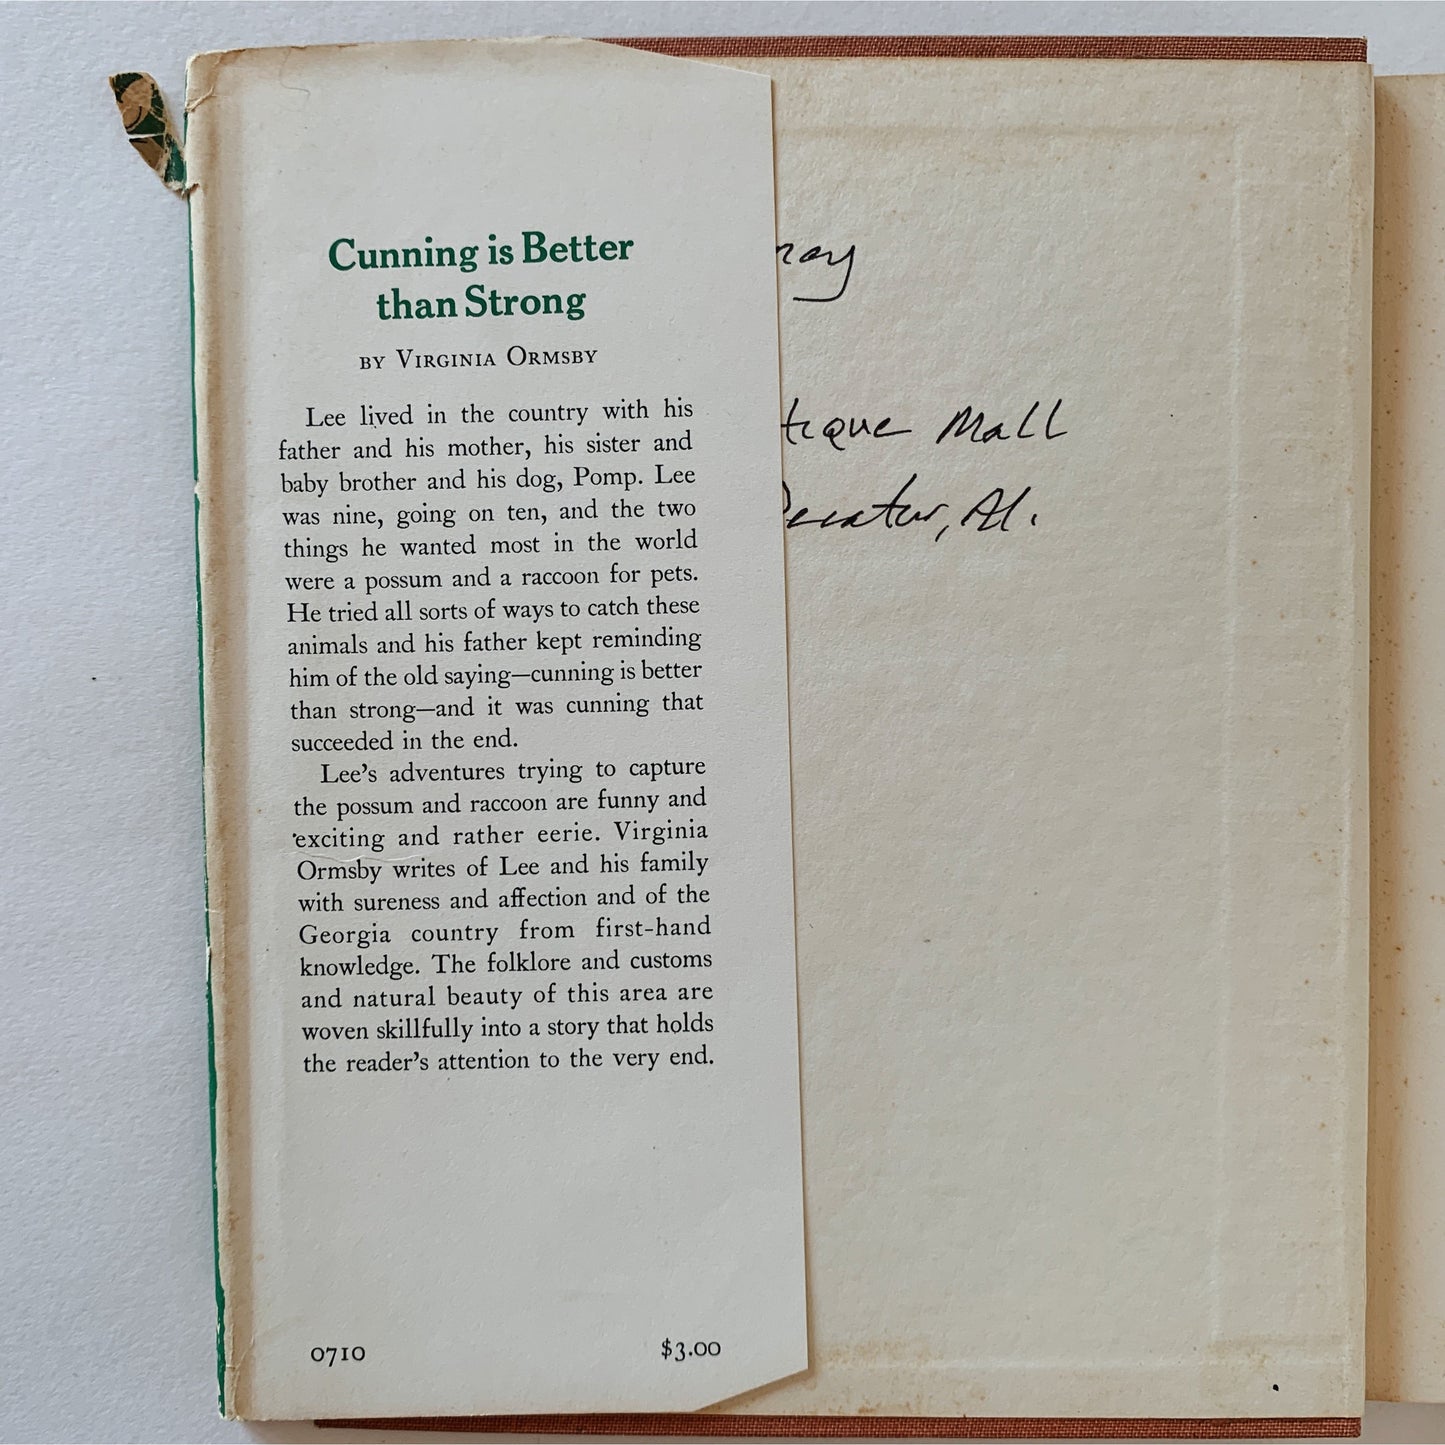 Cunning is Better Than Strong, Virginia H. Ormsby, 1960, 1st Edition, Hardcover